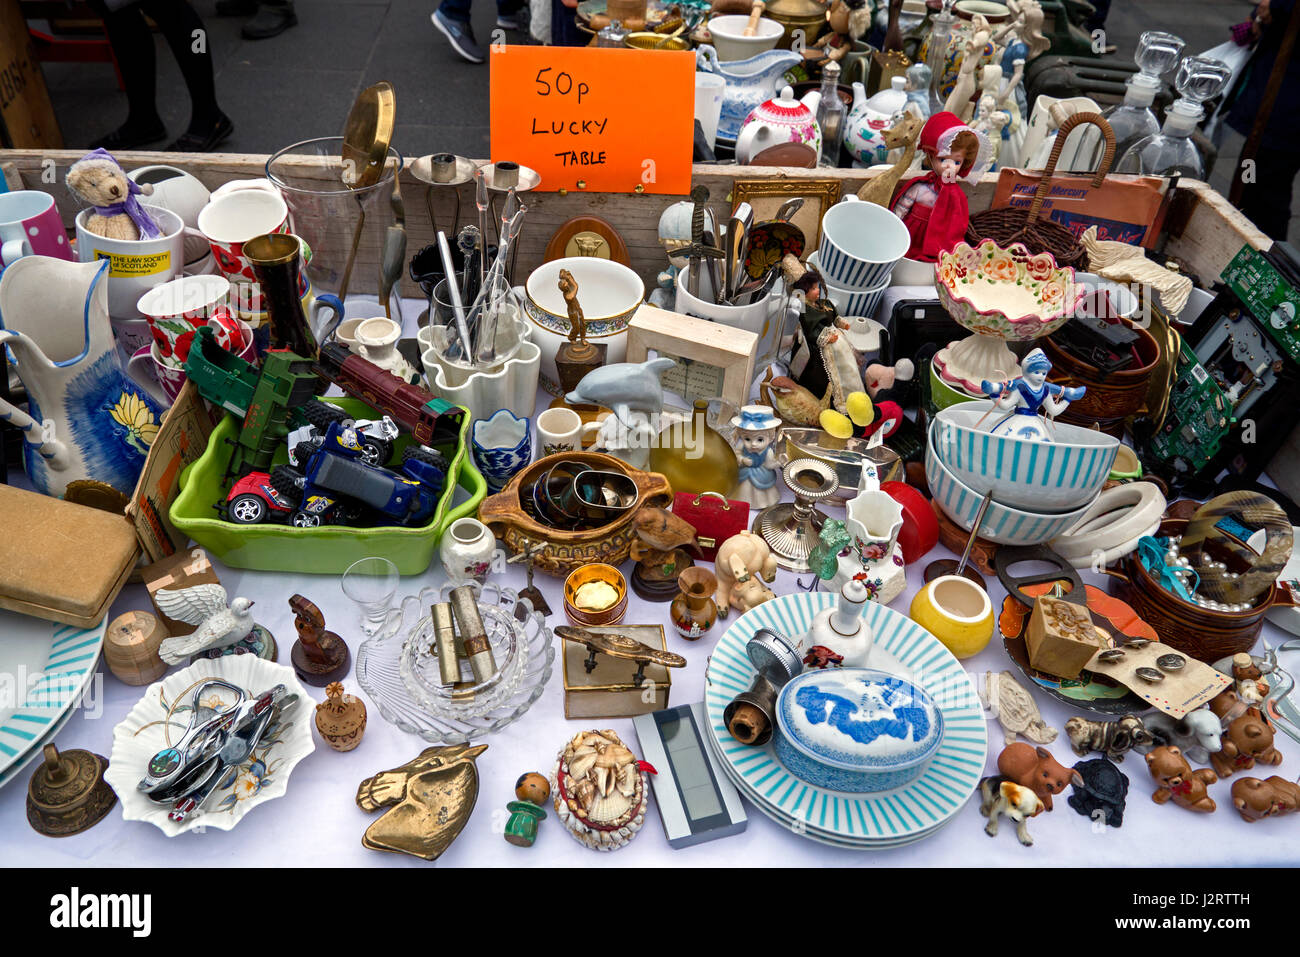 50p bric-a-brac for sale on a stall in the Grassmarket in Edinburgh's Old Town. Stock Photo